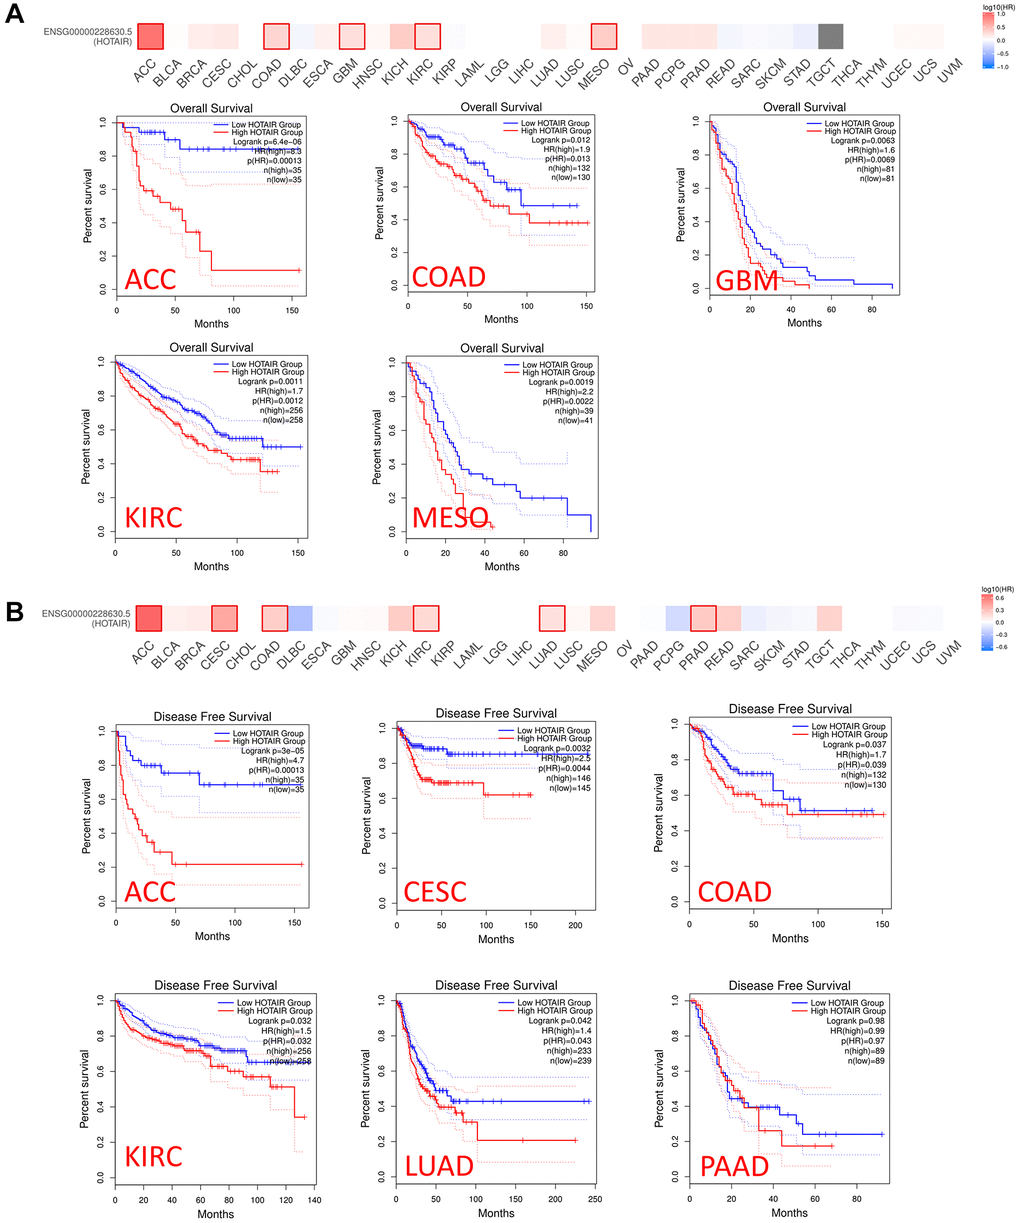 Relationship between HOTAIR expression level and patient survival in TCGA tumors. Relationship between HOTAIR gene expression and survival overall (A), disease-free survival (B) was assessed in all TCGA tumors using GEPIA2. The positive results of survival map and Kaplan-Meier curves are listed.